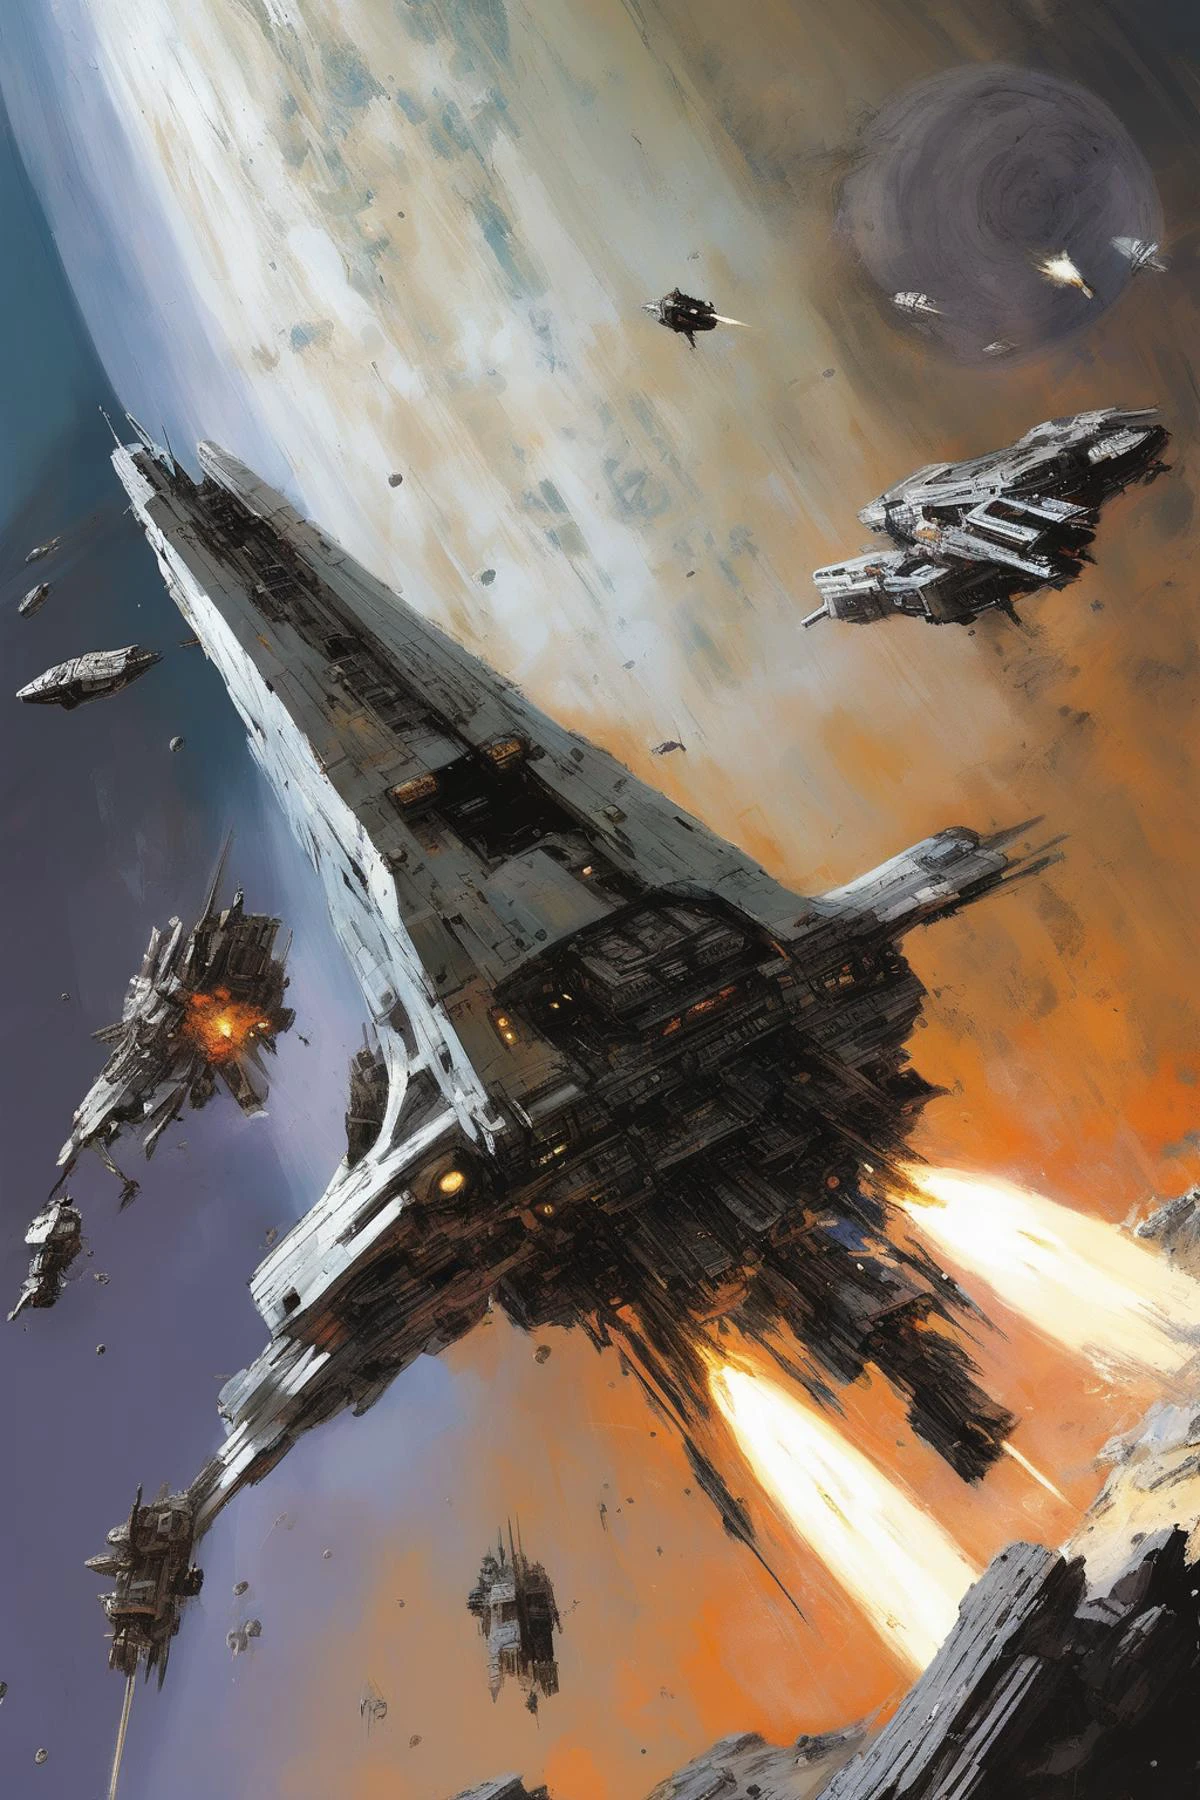 John Berkey Style - a damaged silver dreadnaught spaceship firing weapons in a massive space battle, in front of a crumbling planet in the style of john berkey in three-quarters perspective